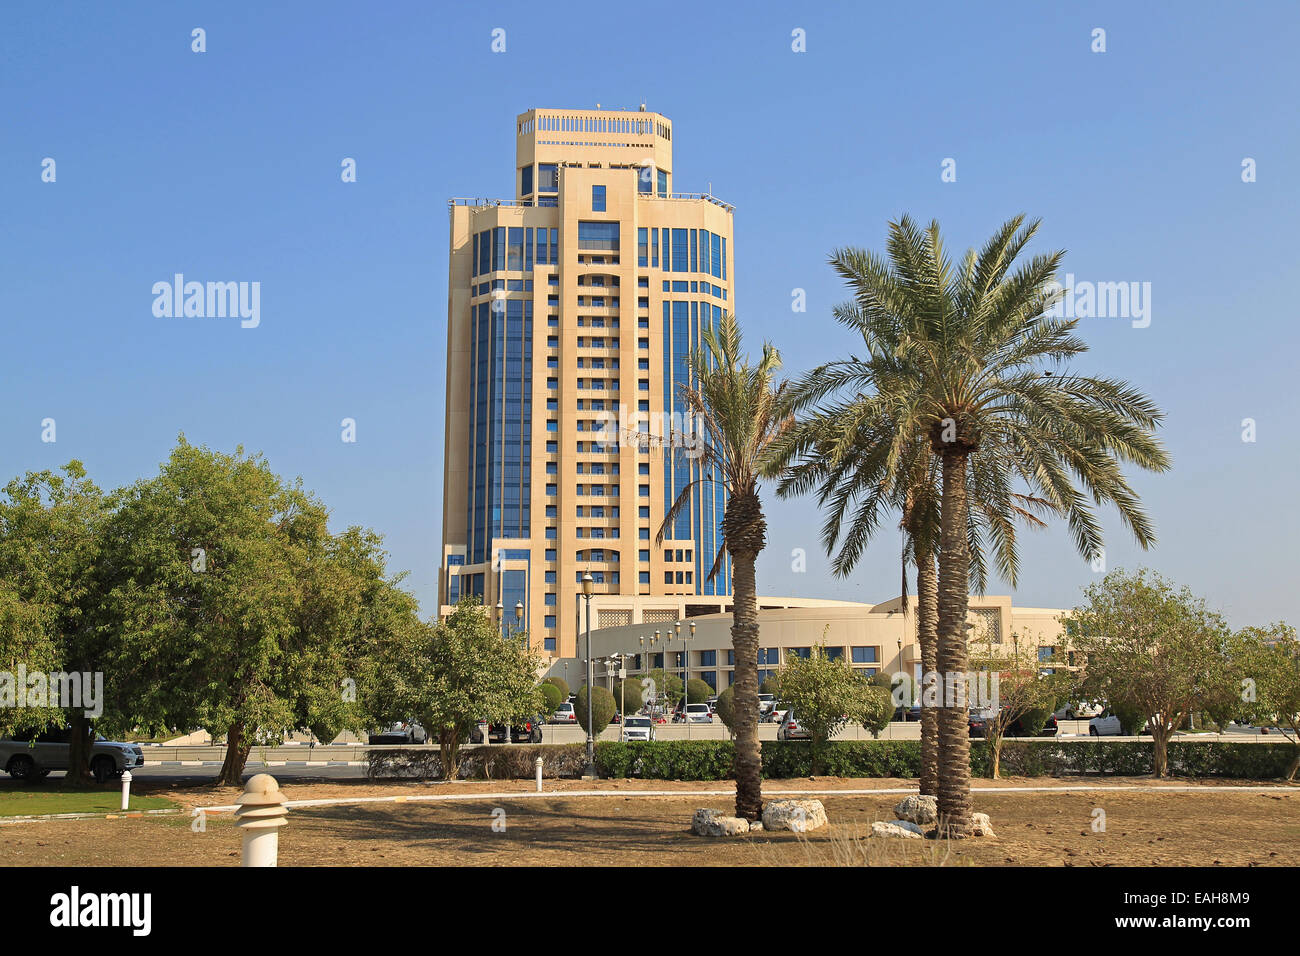 A general view of the exterior of the Ritz-Carlton Hotel, Doha, Qatar Stock Photo